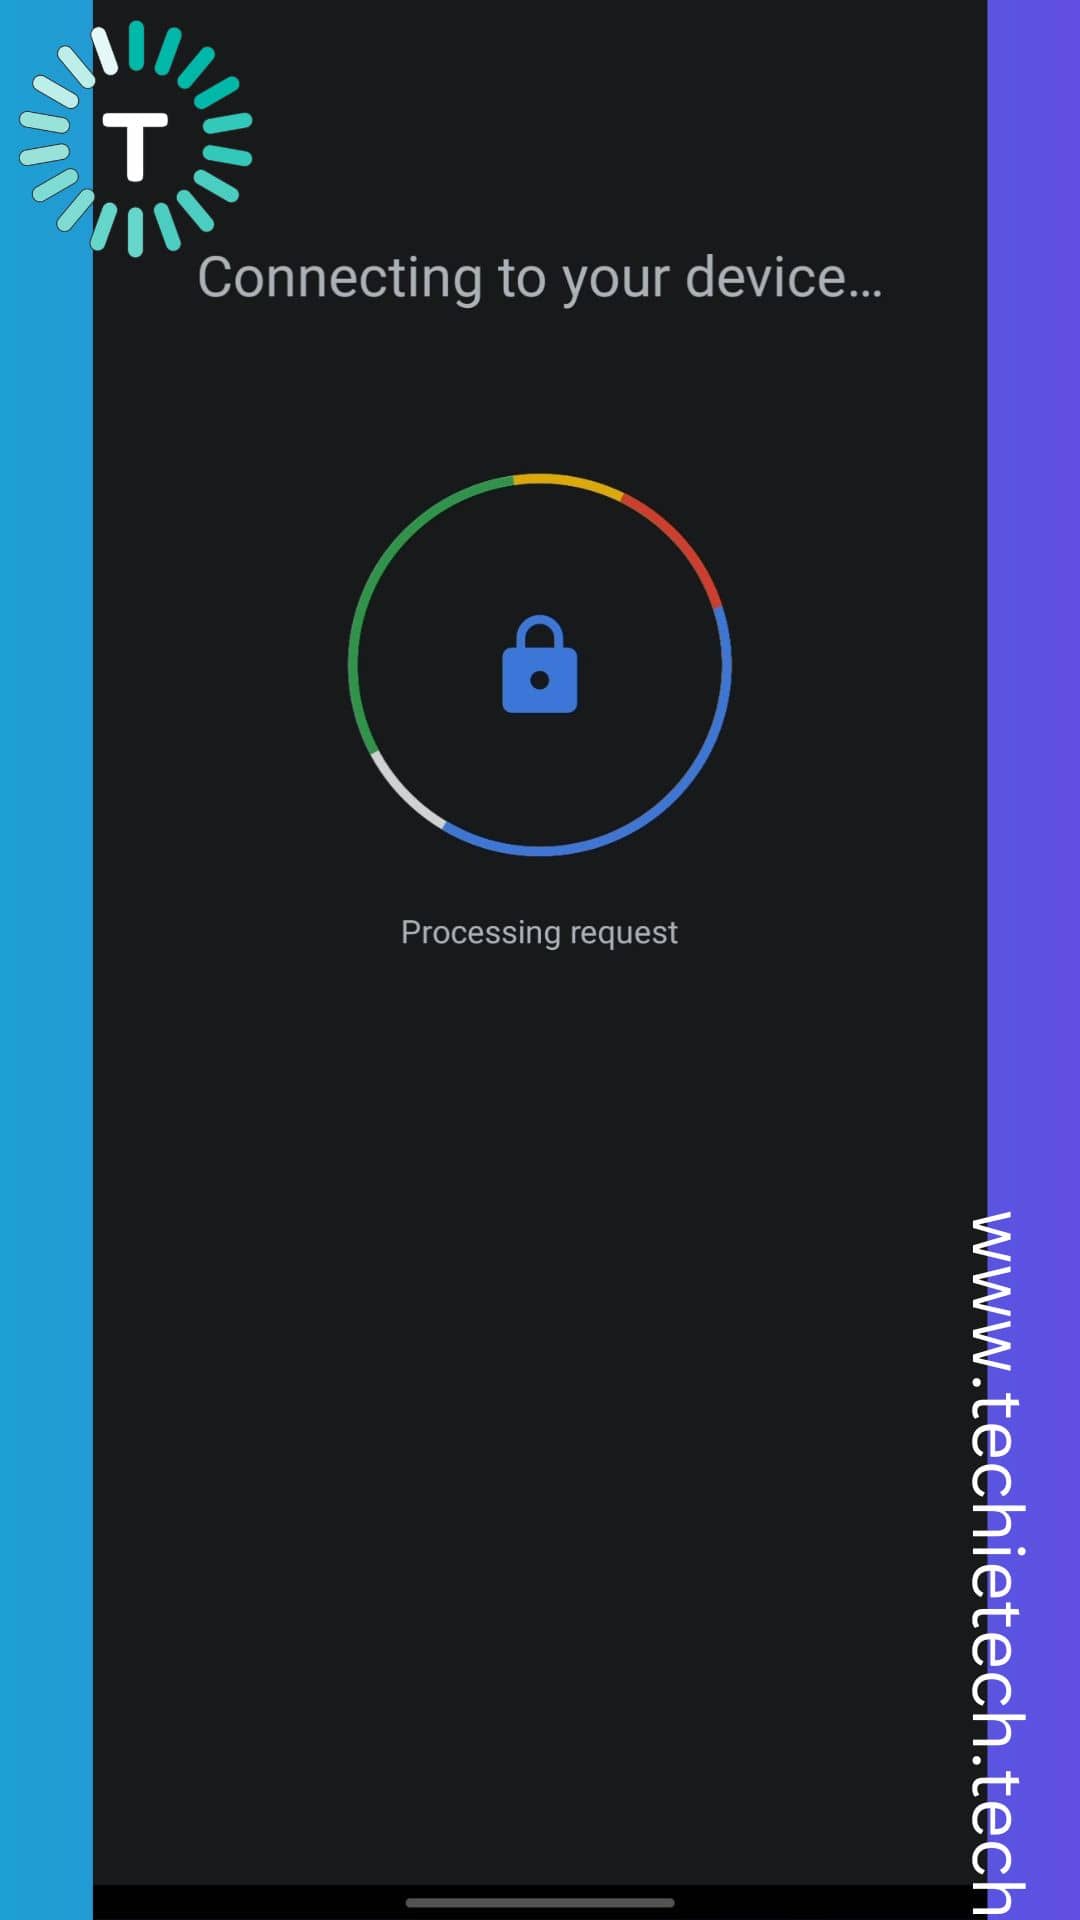 Animation on your phone showing connecting your device